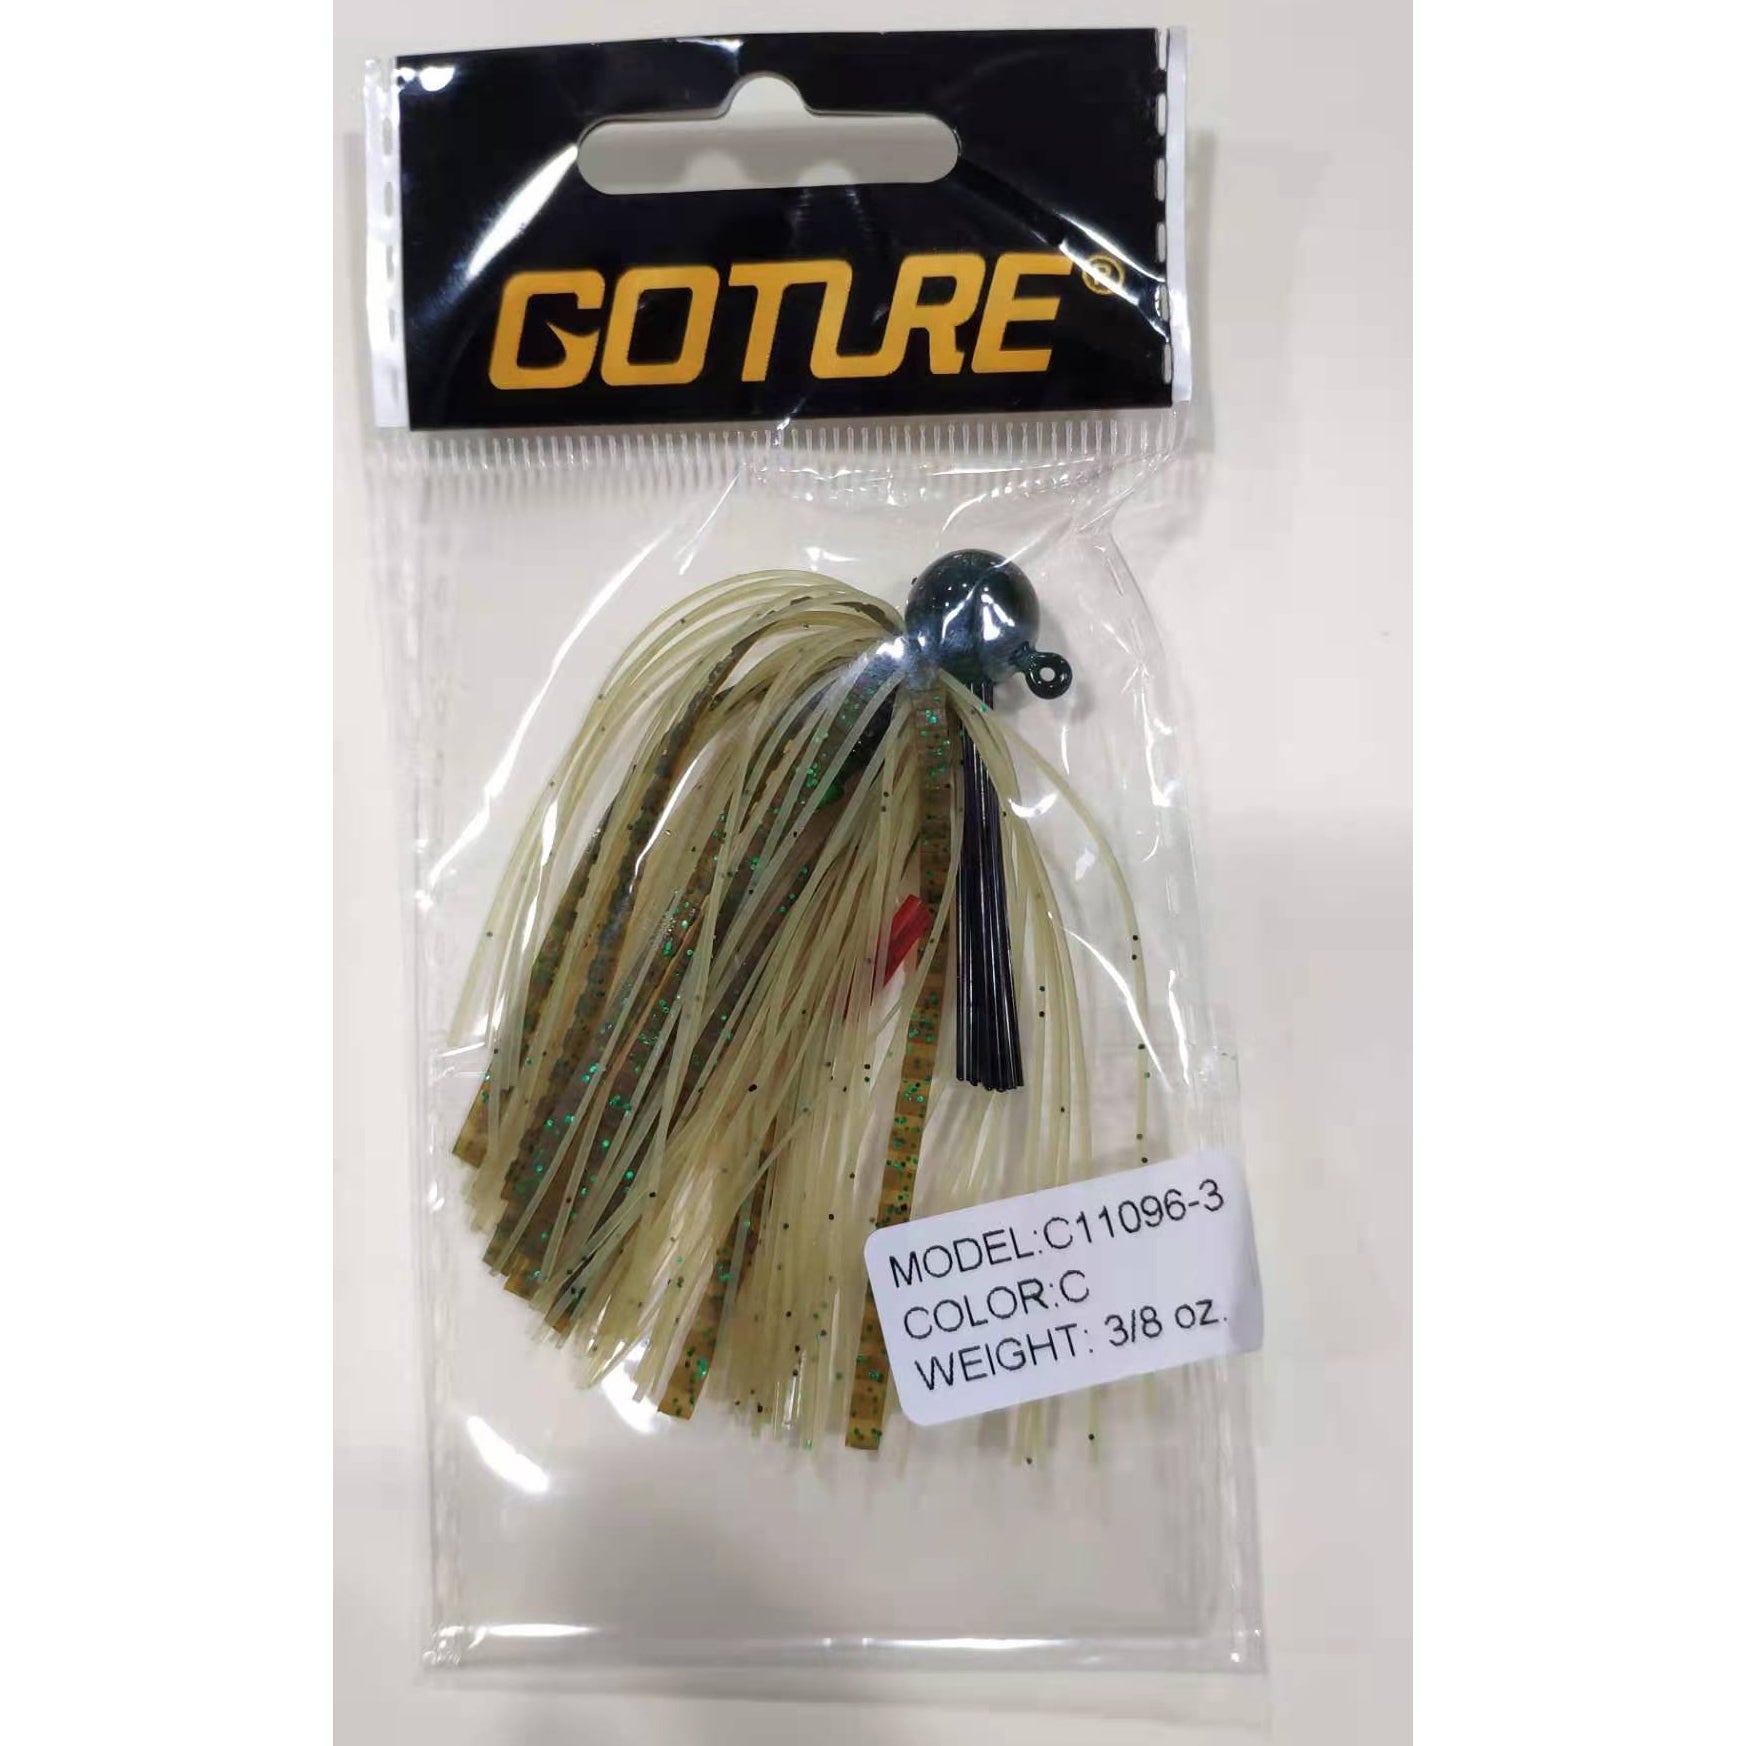 Ultimate Bass Master Jig: Weed Guard Football Jig with Silicone